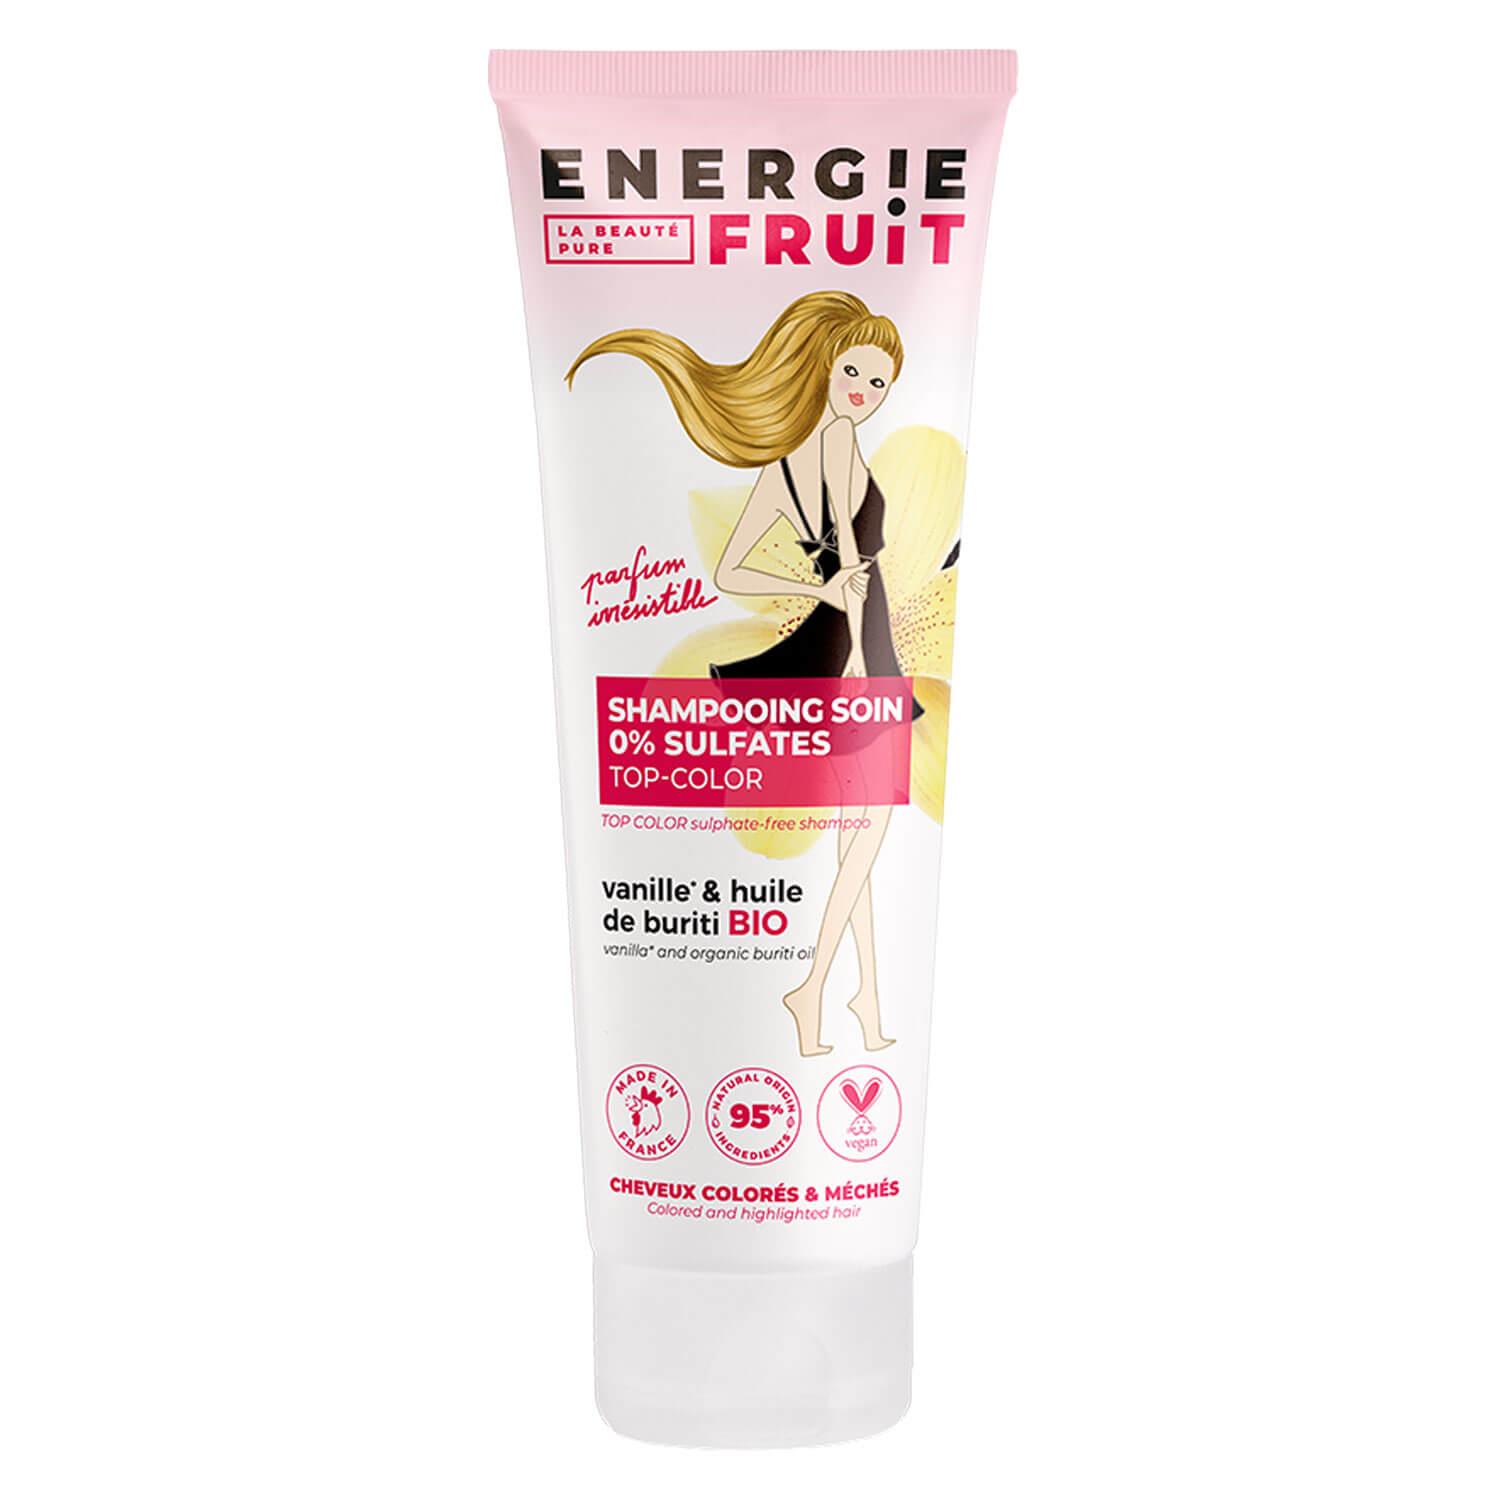 ENERGIE FRUIT - Shampooing Soin 0% Sulfates Top-Color